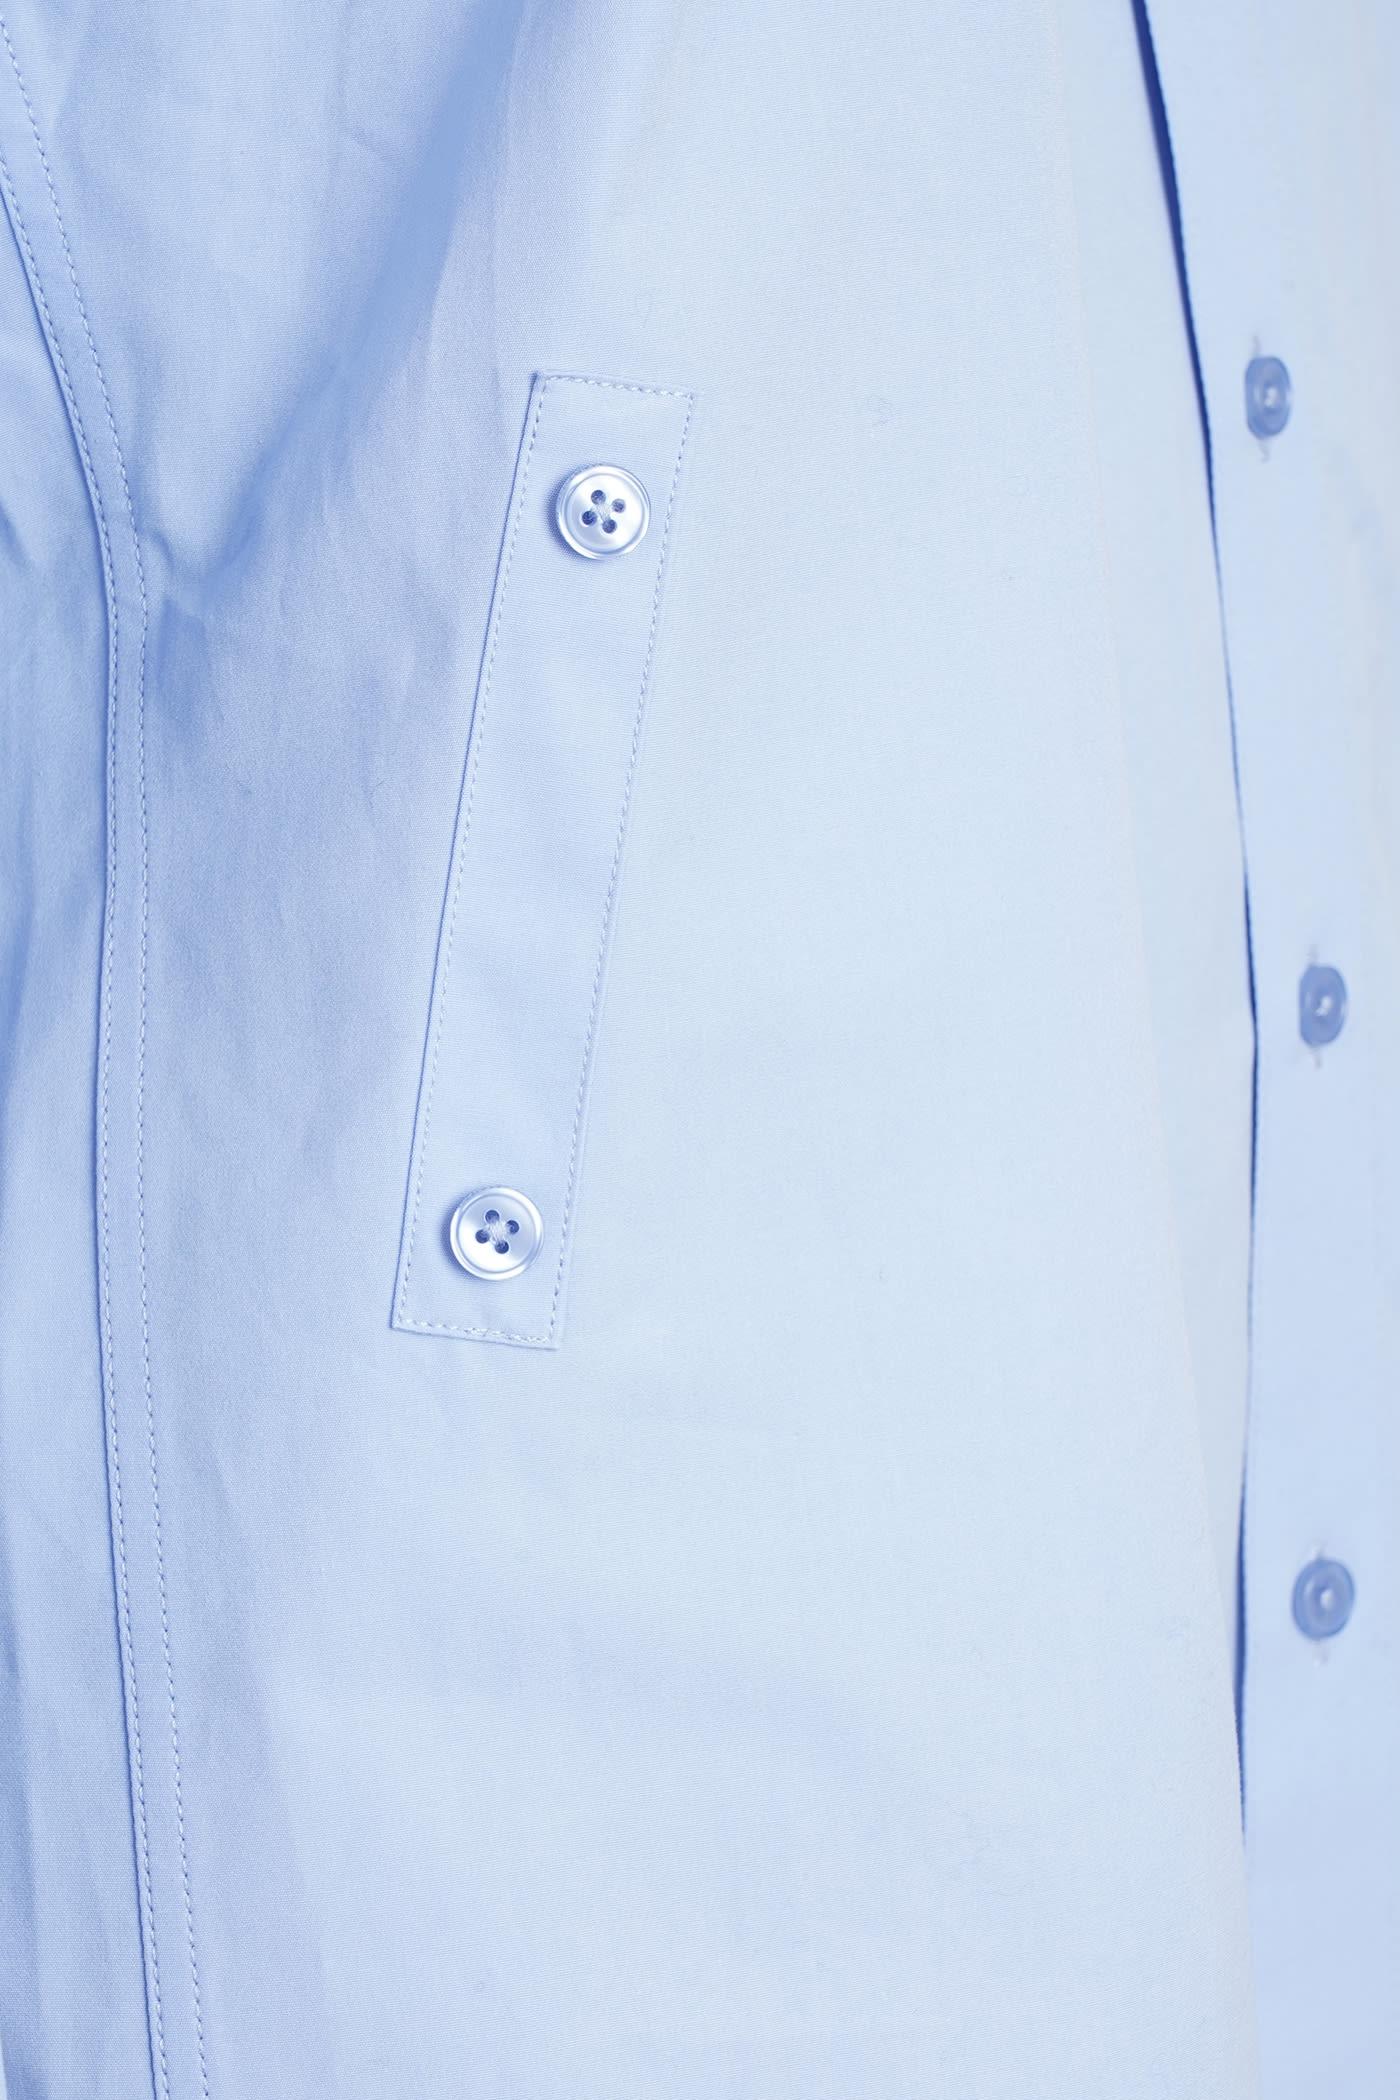 Martine Rose Shirt In Blue Cotton for Men | Lyst